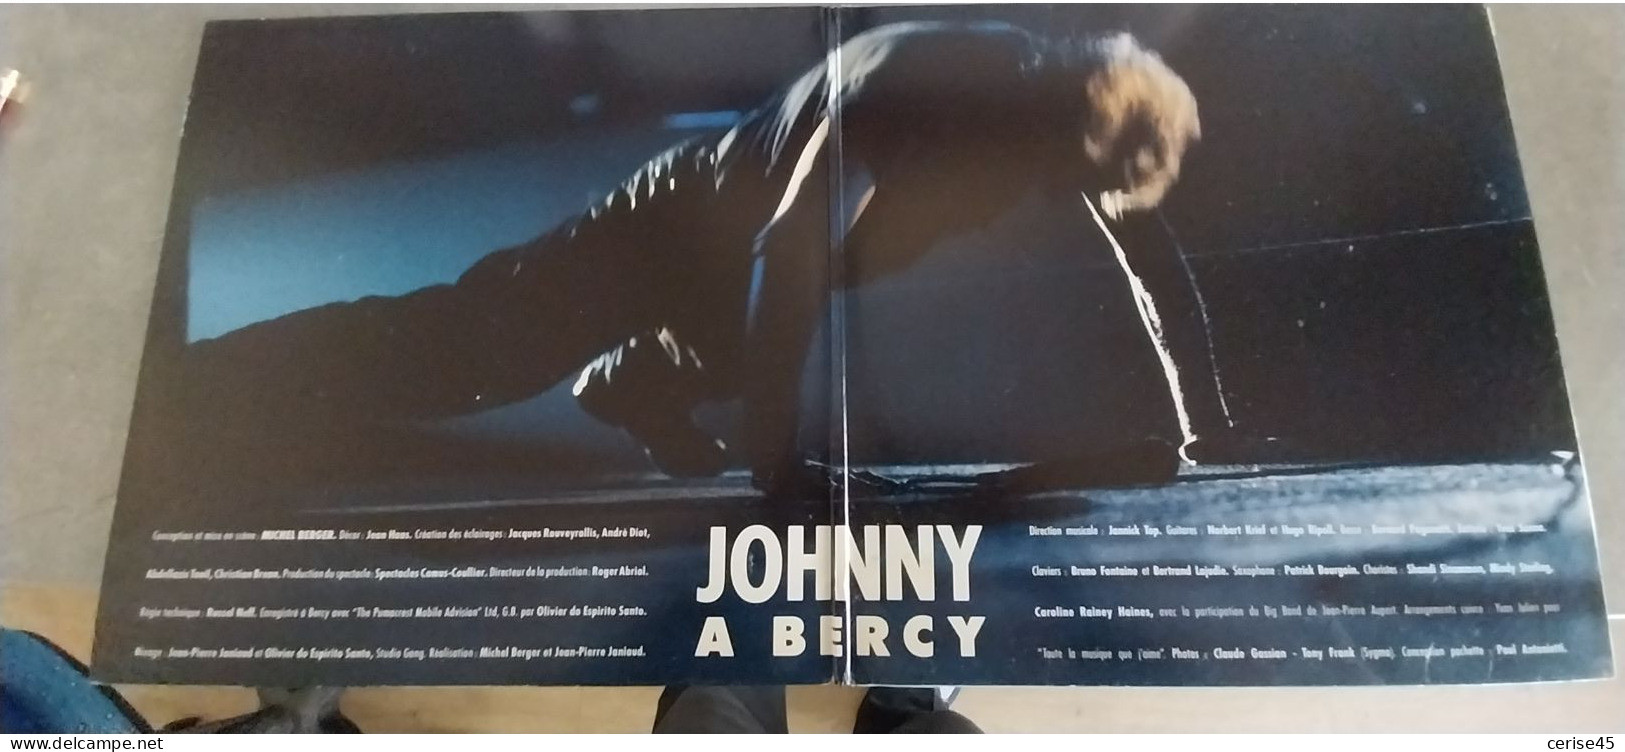 Johnny Hallyday  A BERCY...double 33Tours ..1988 - Other - French Music